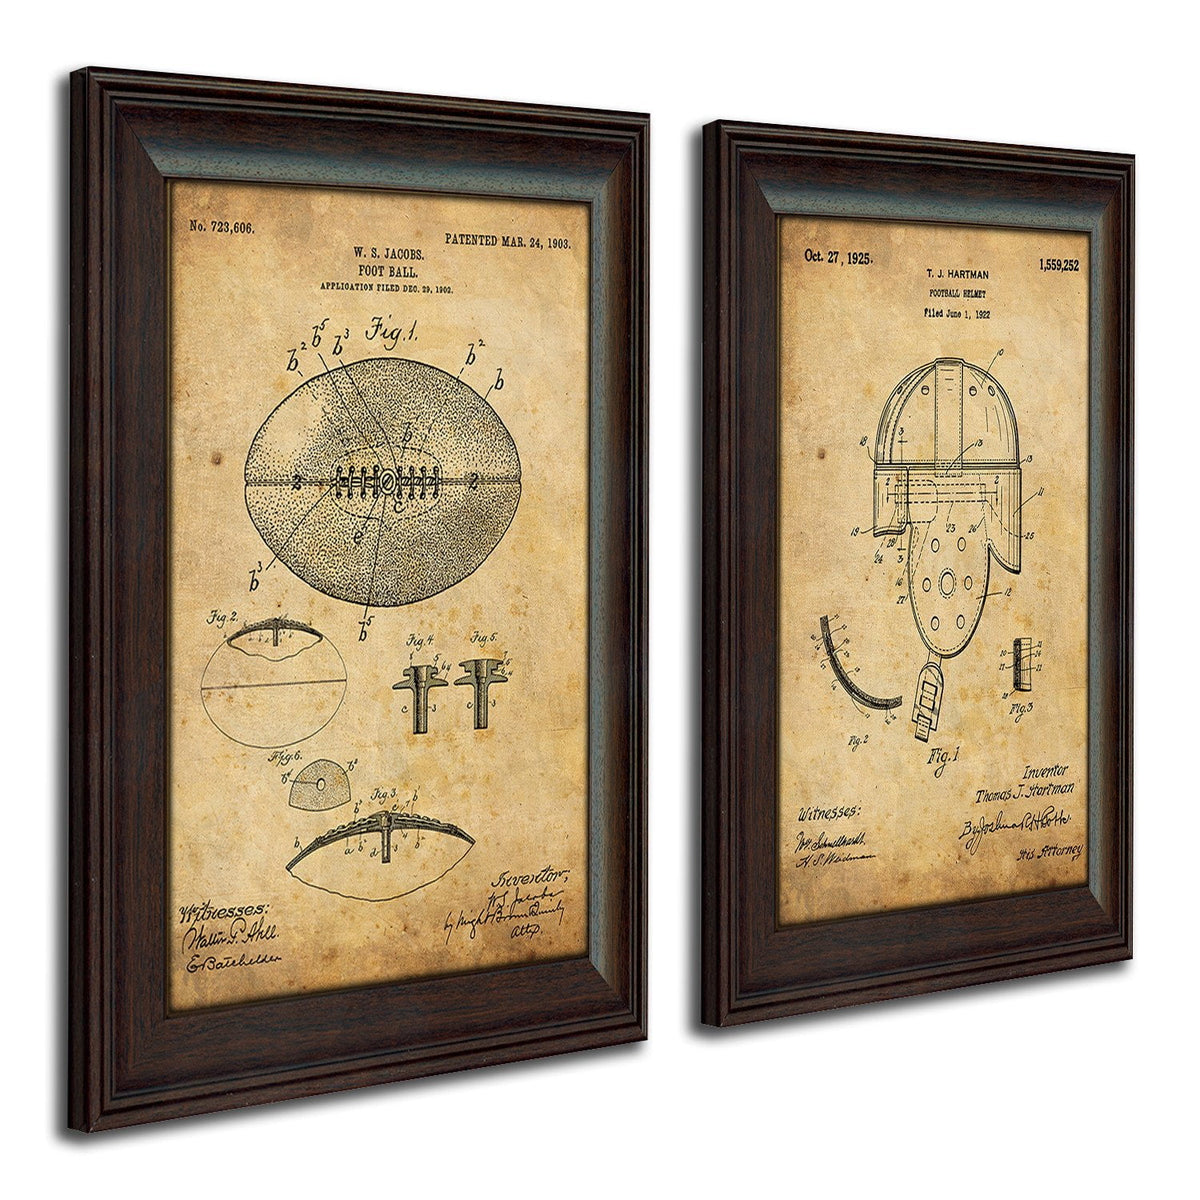 Vintage patent art set based on the original patent art for a football and helmet - Personal-Prints